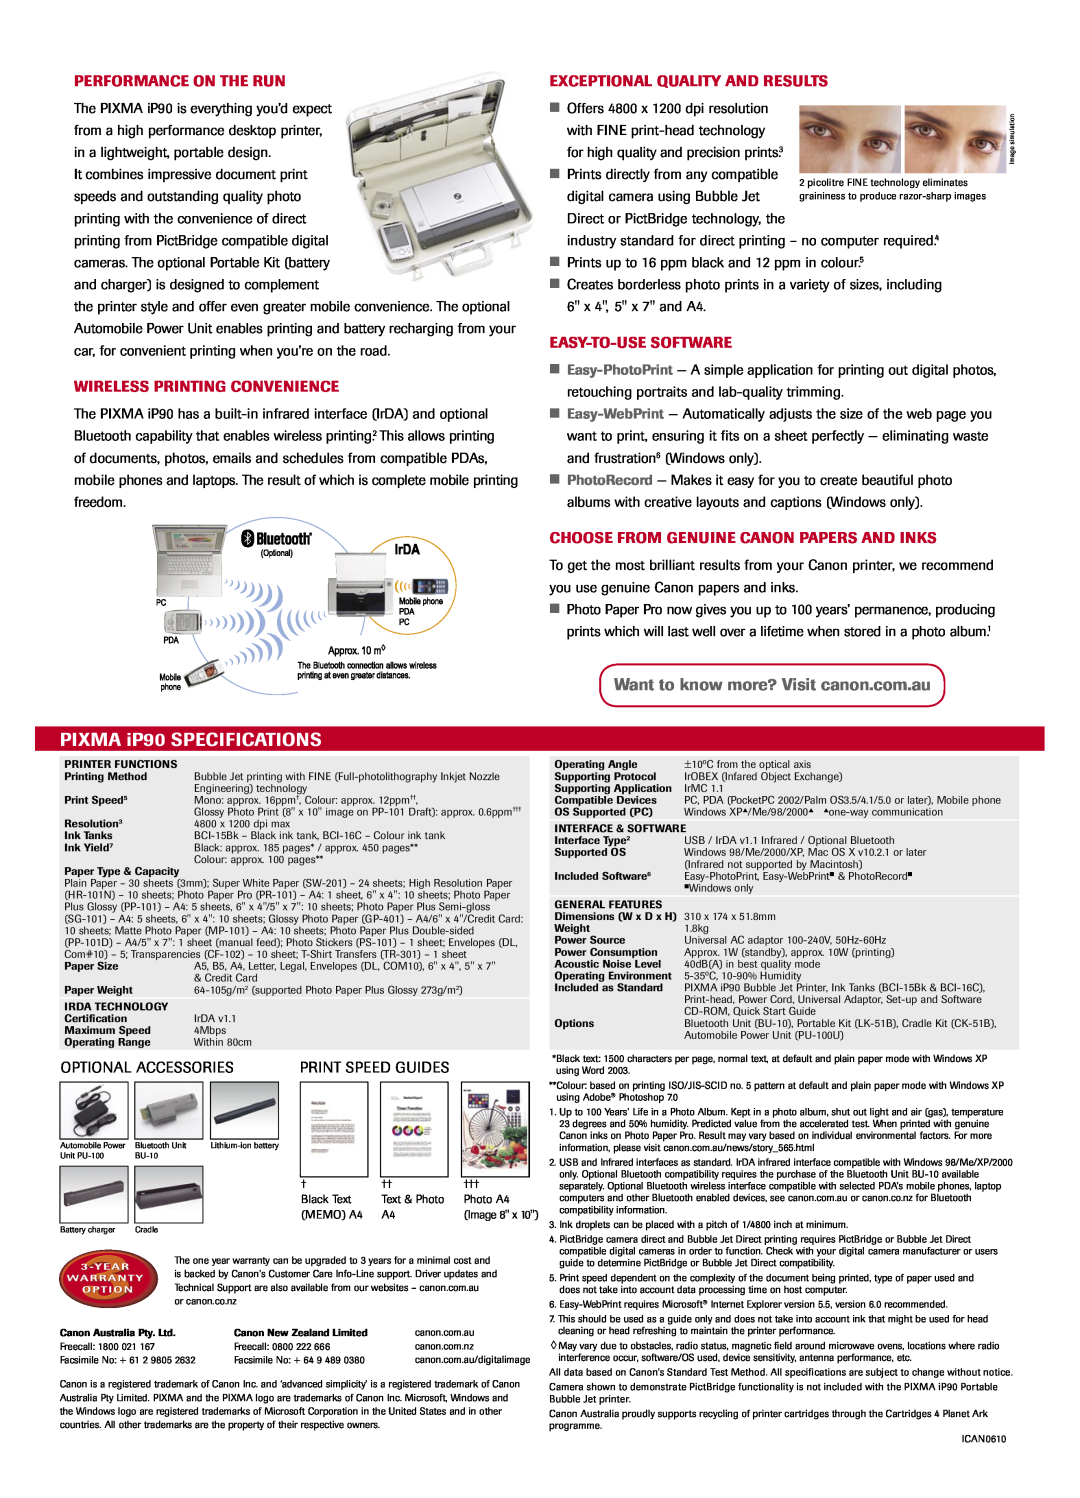 Canon PIXMA iP90 manual Performance On The Run, Wireless Printing Convenience, Exceptional Quality And Results 